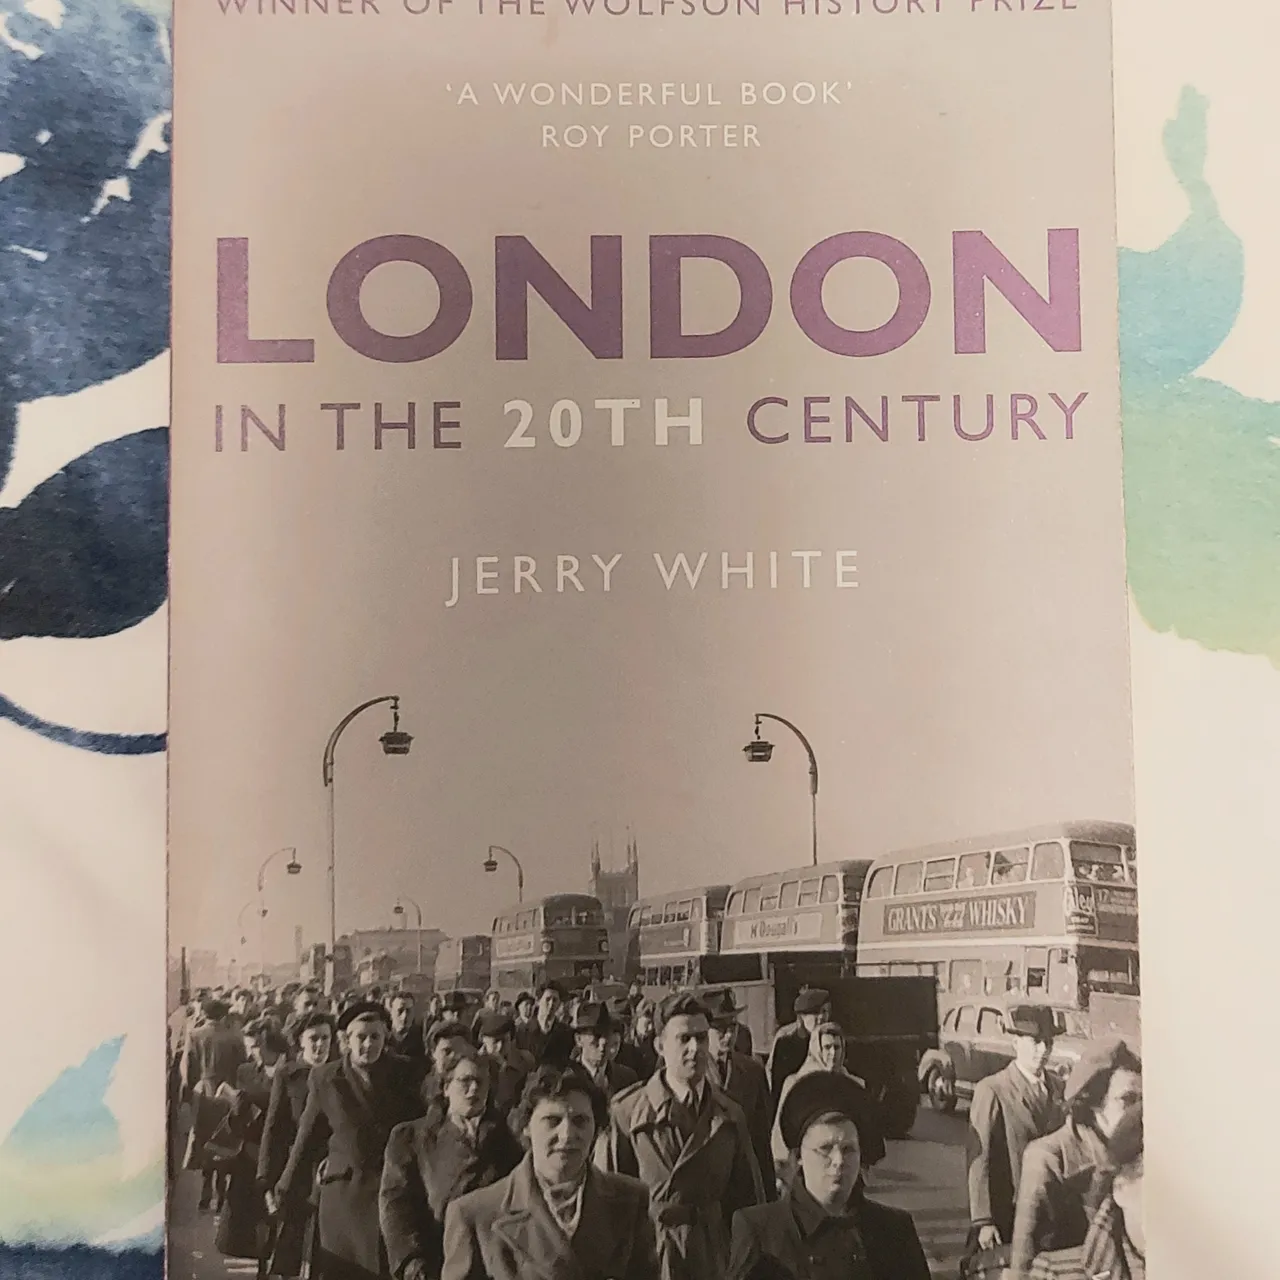 London in the 20th Century by Jerry White photo 1